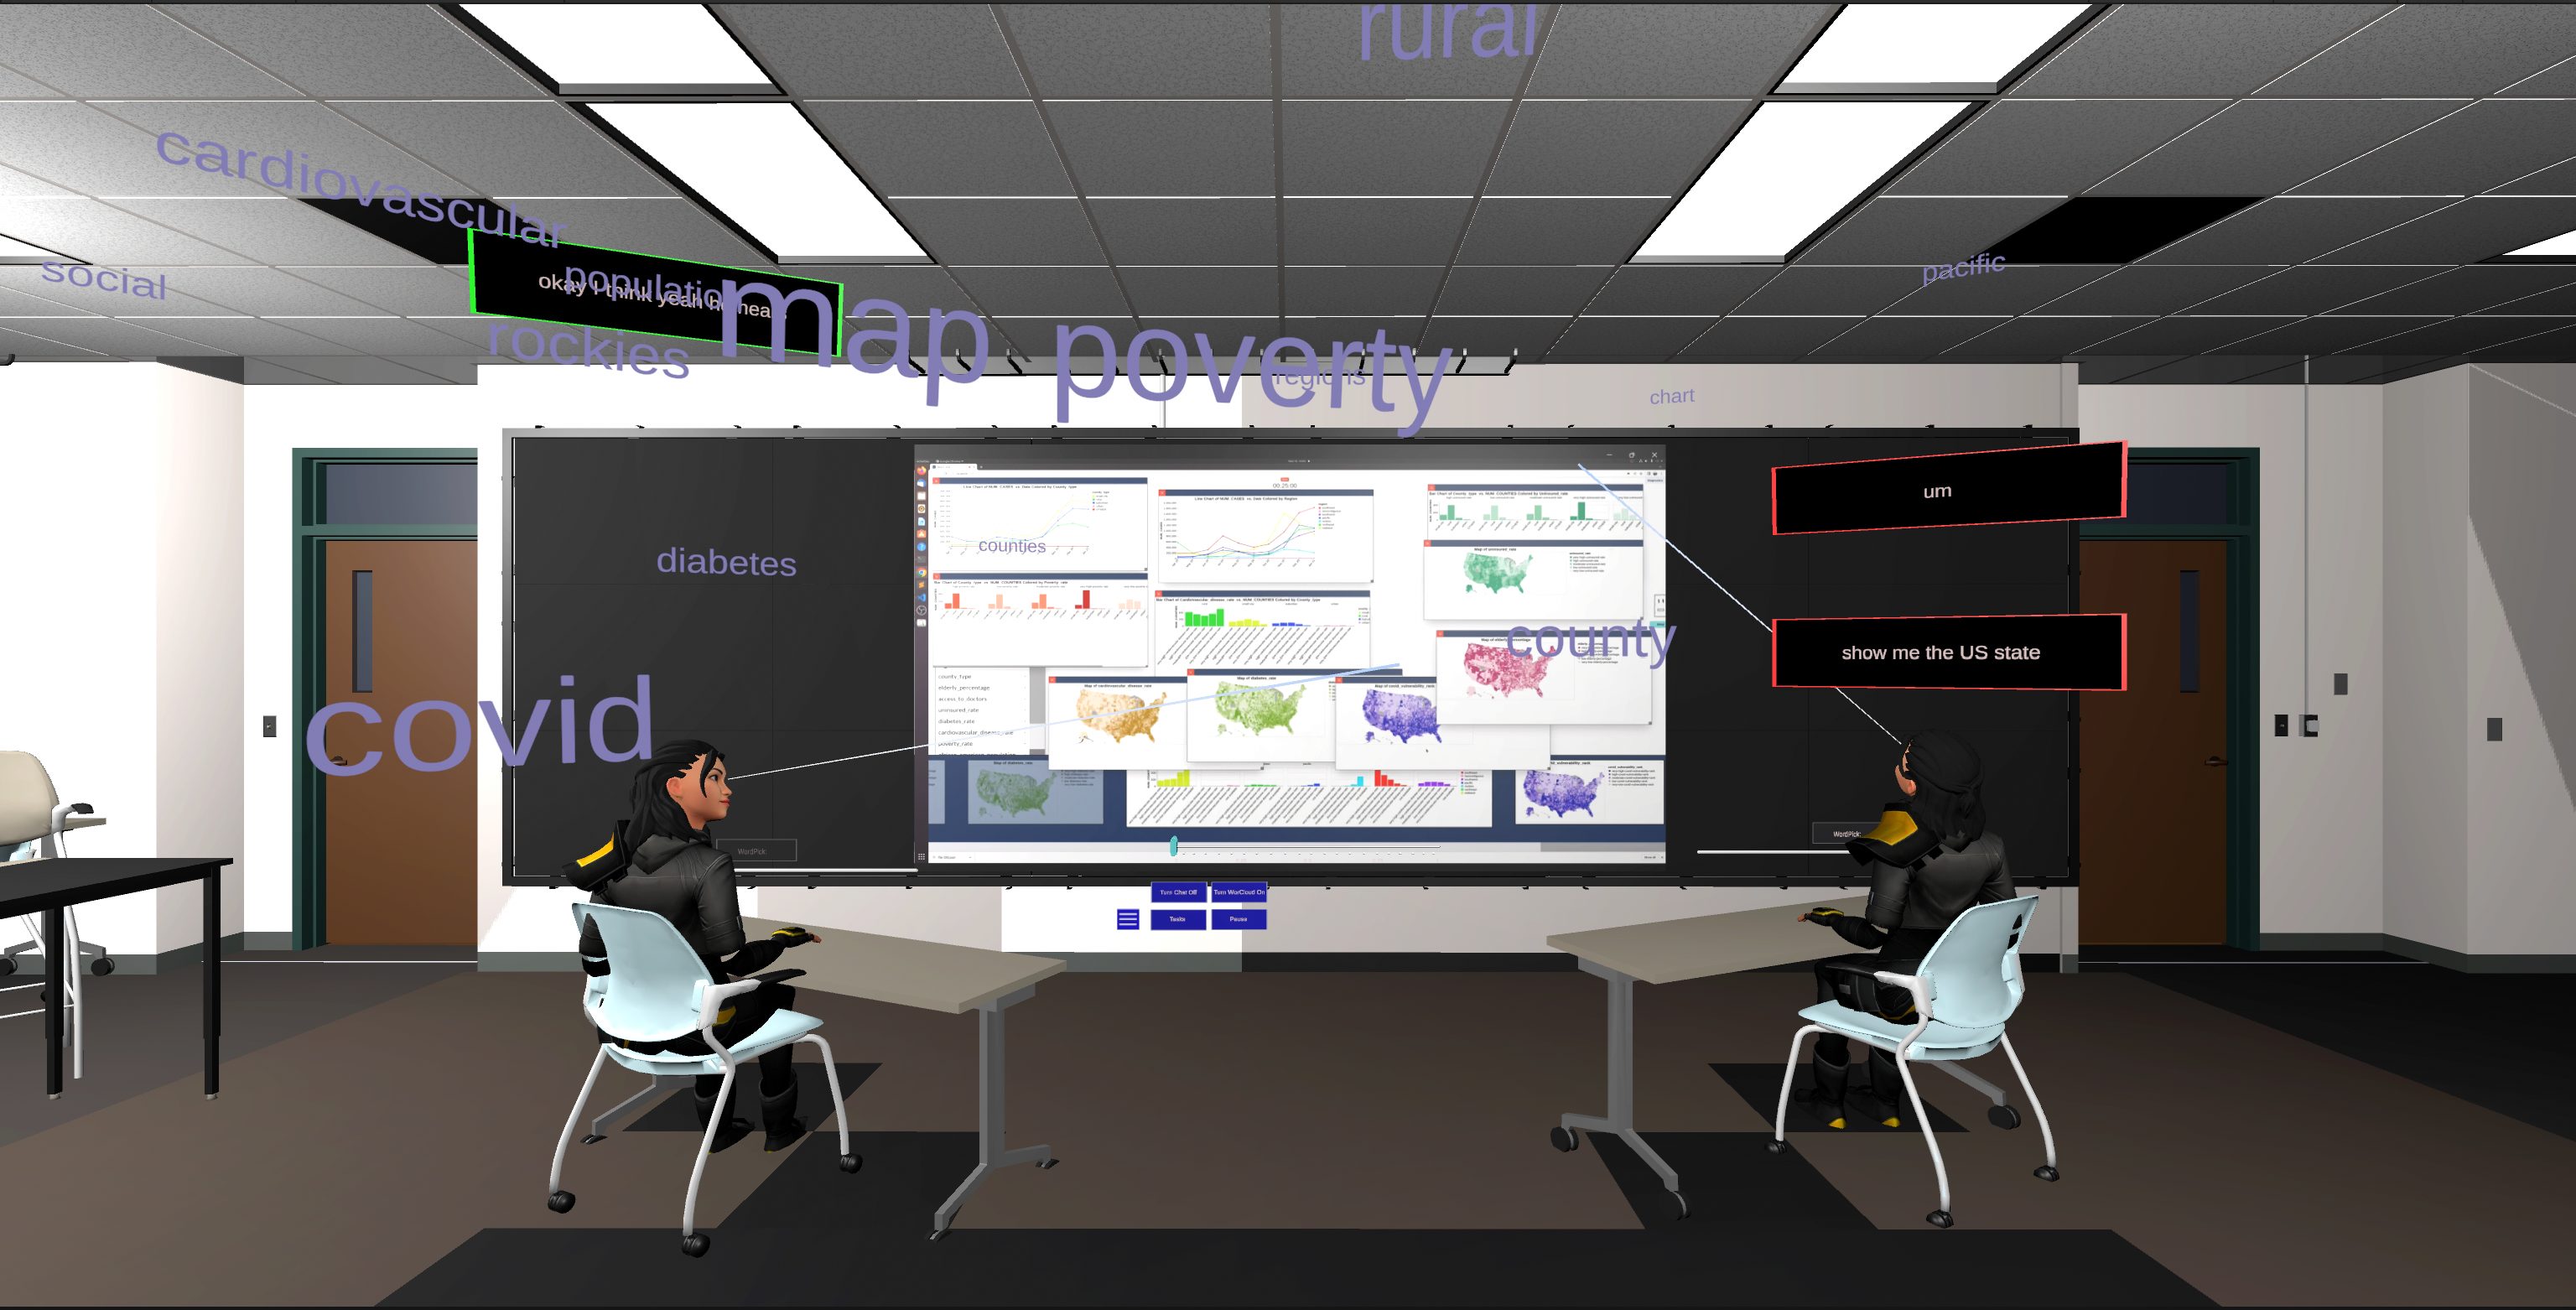 PSA is an immersive MR/VR framework for experiencing and analyzing recorded conversations and events. We see two participants represented as virtual avatars engaged in a conversation.